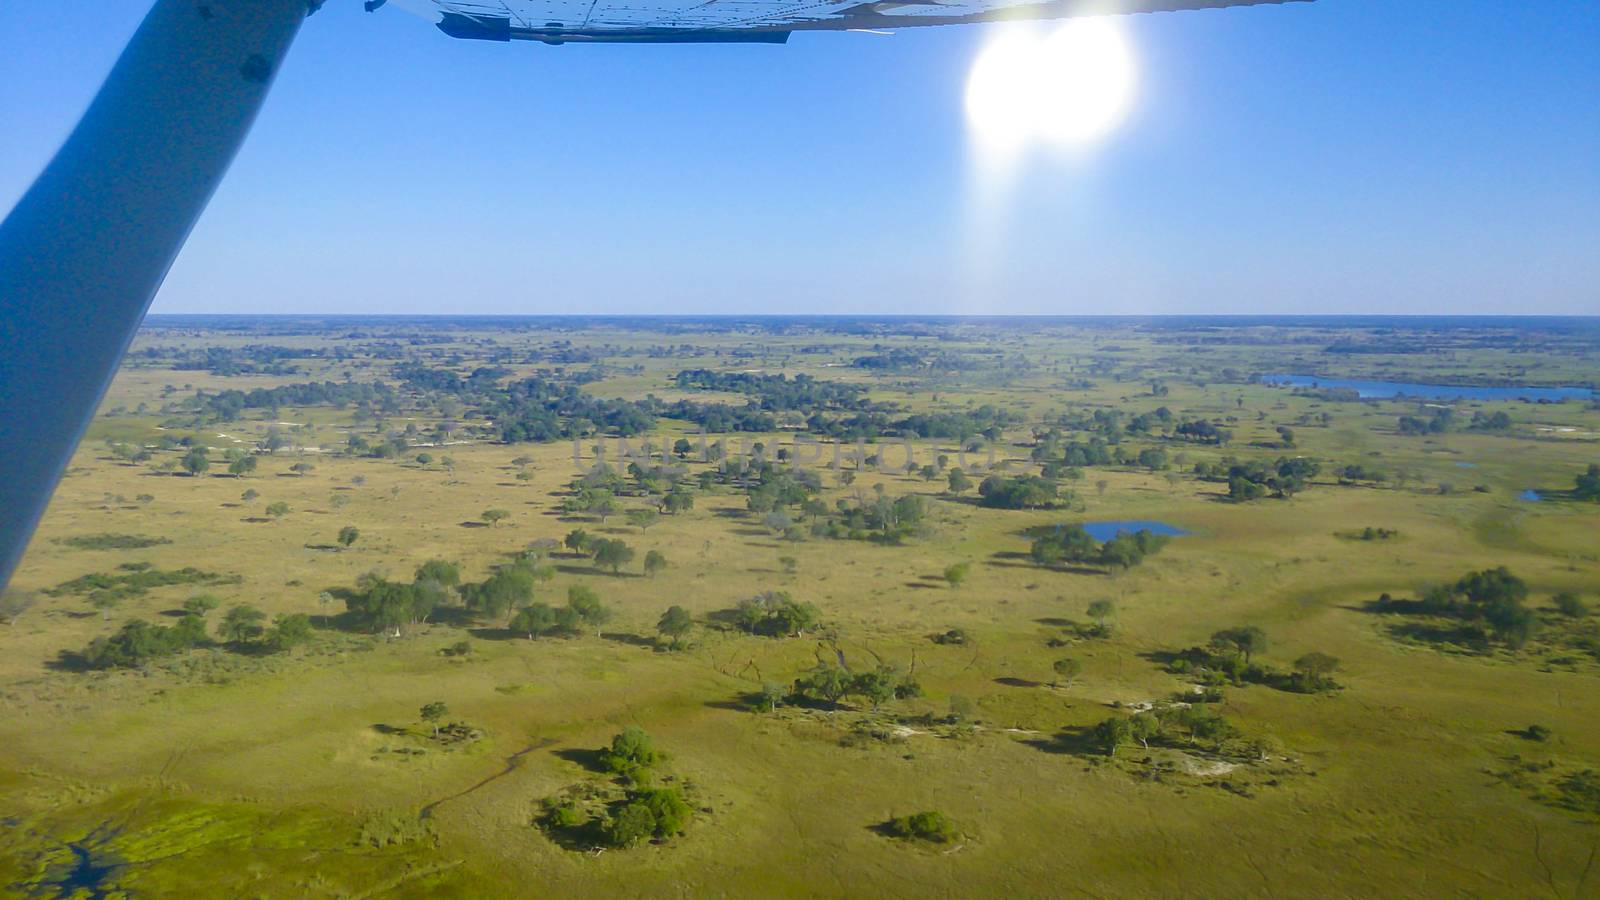 Aerial view at Moremi national park in Botswana, Africa, as seen from a small aircraft. Wing visible, bright sunshine on blue sky. by kb79